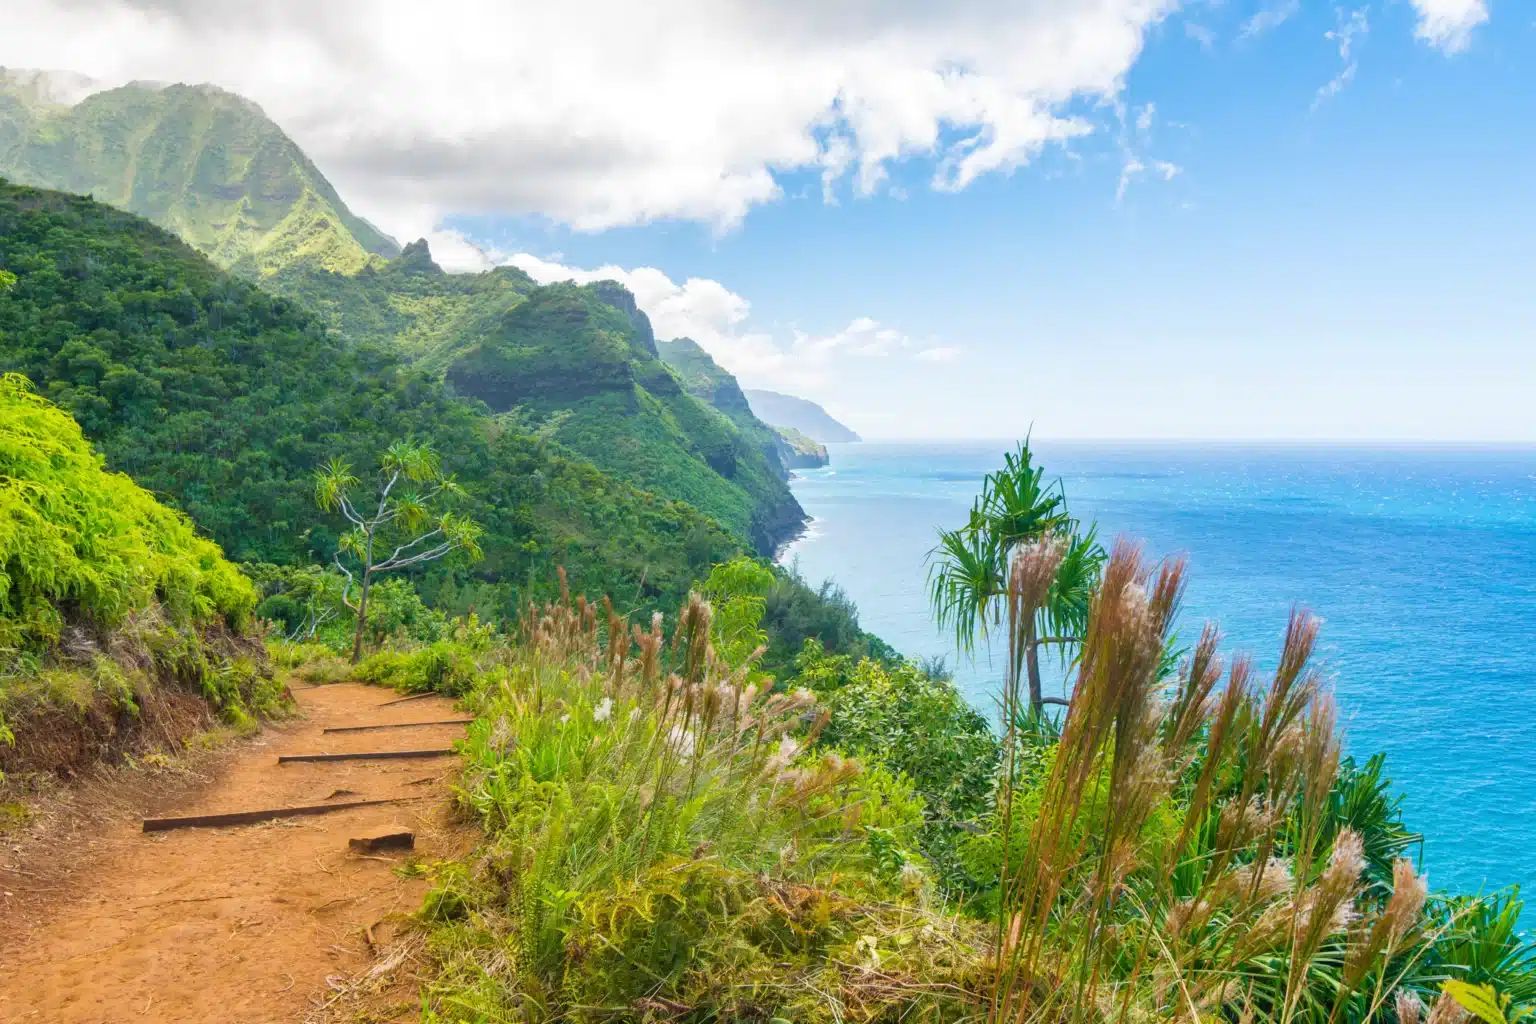 Kalalau Trail: Hiking Trail Attraction in the town of Hanalei on Kauai